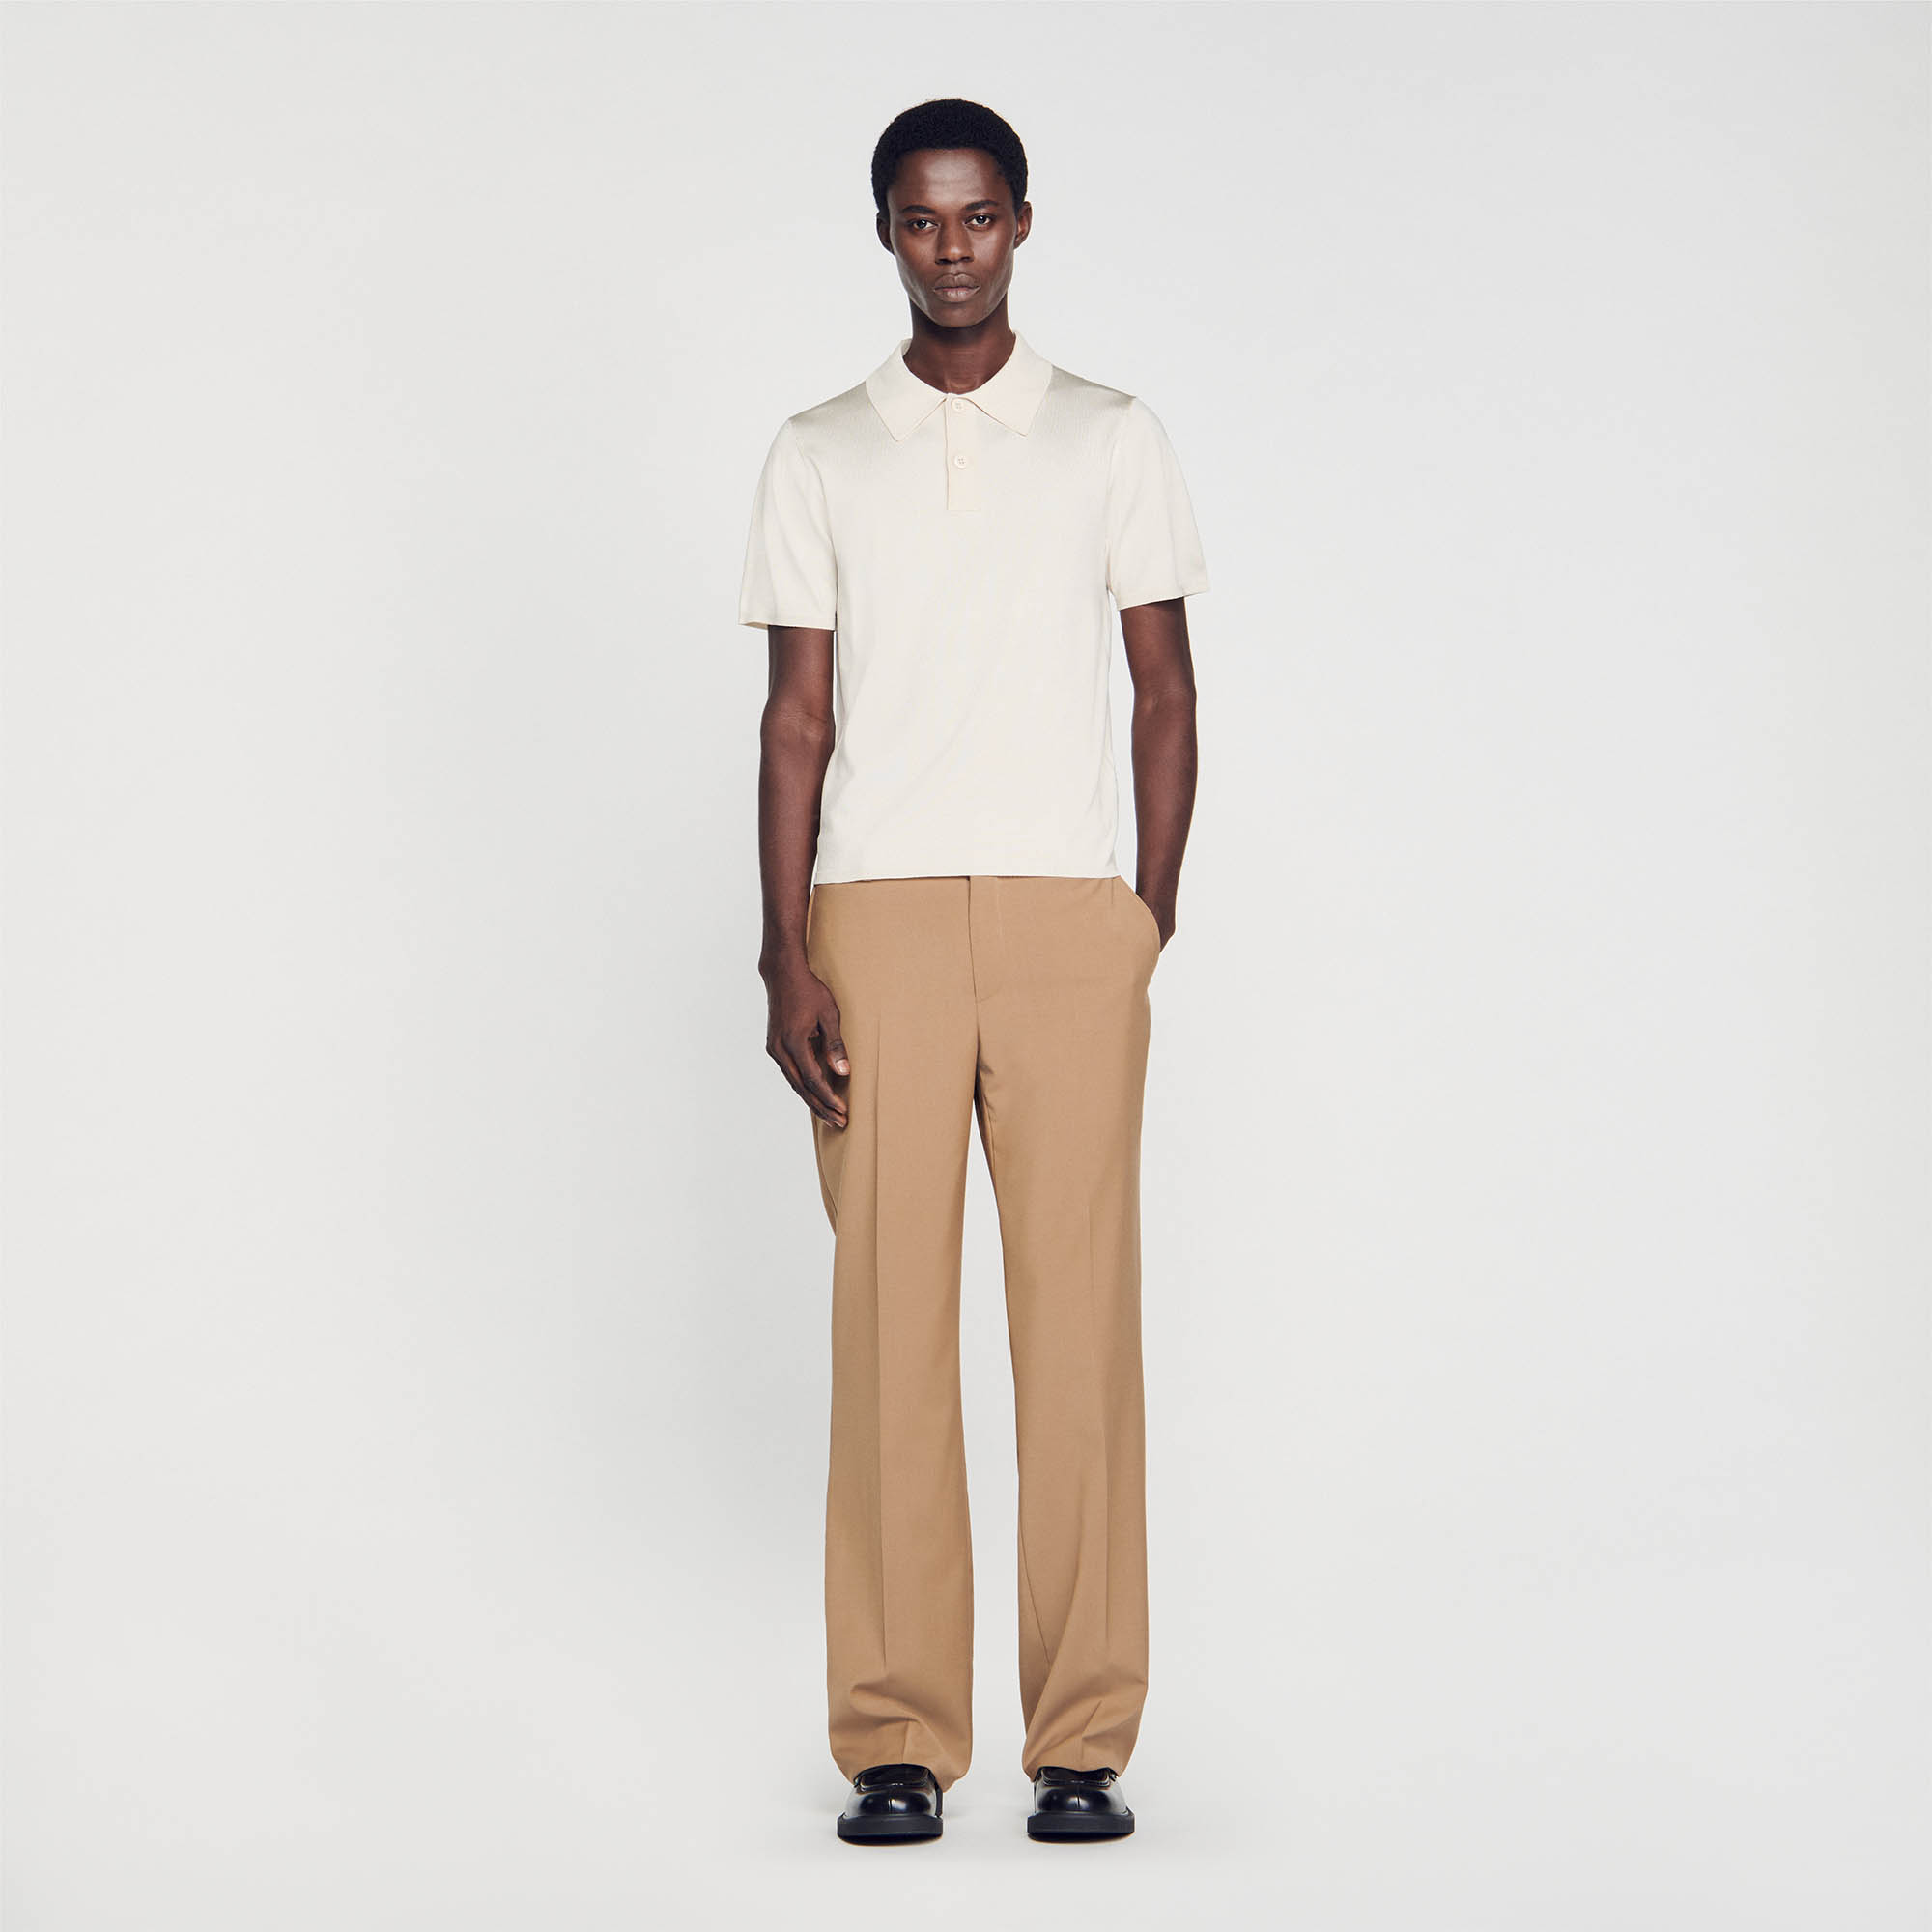 Sandro acetate Knitted polo shirt with a button-up collar and short sleeves